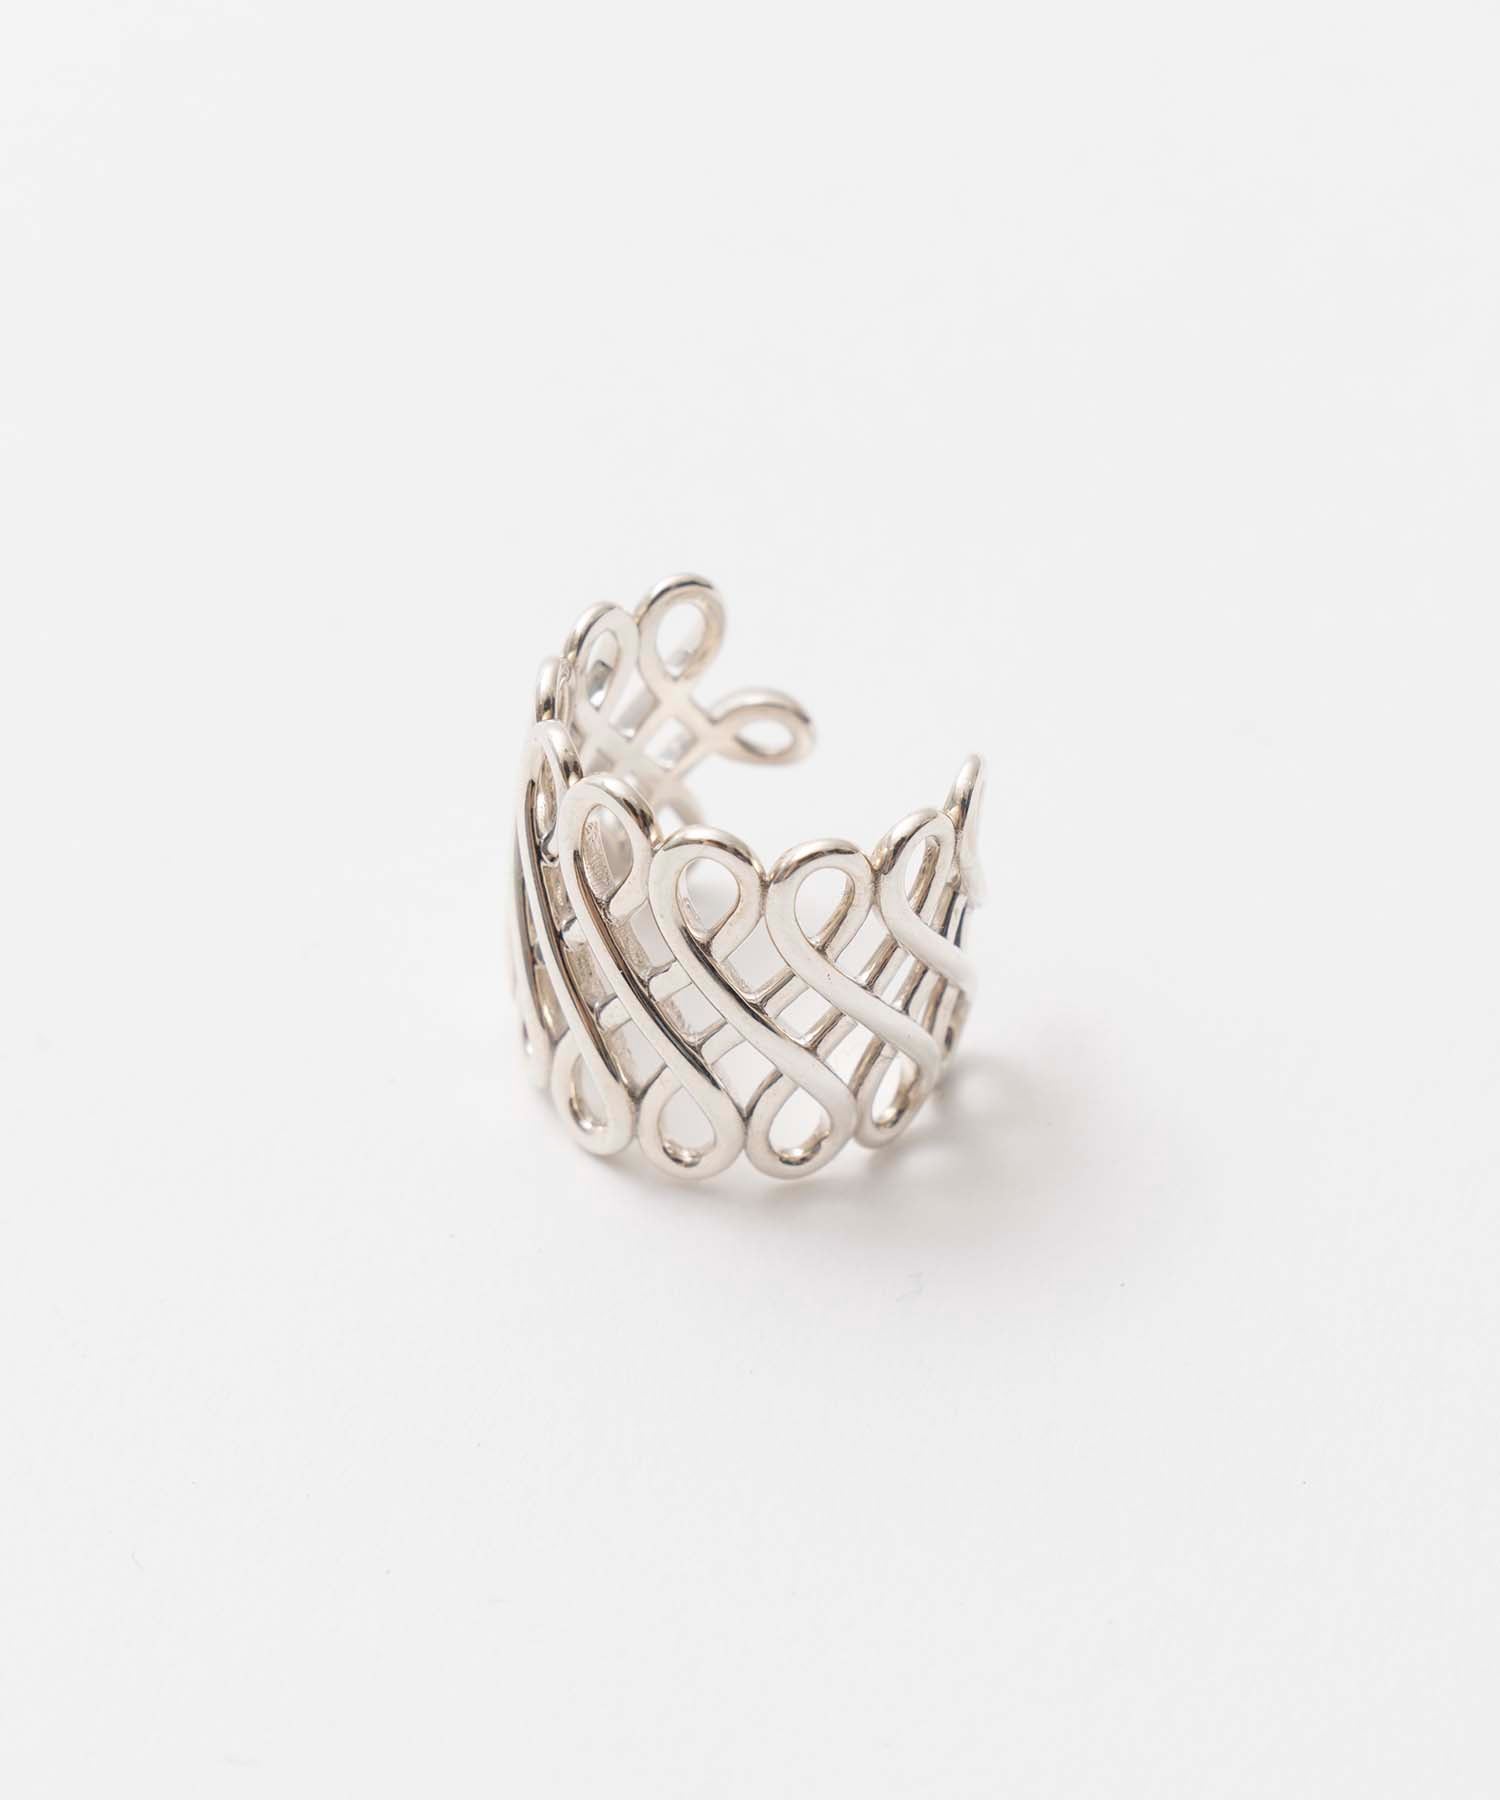 【hacot by MAISON SPECIAL】Crescent Ring